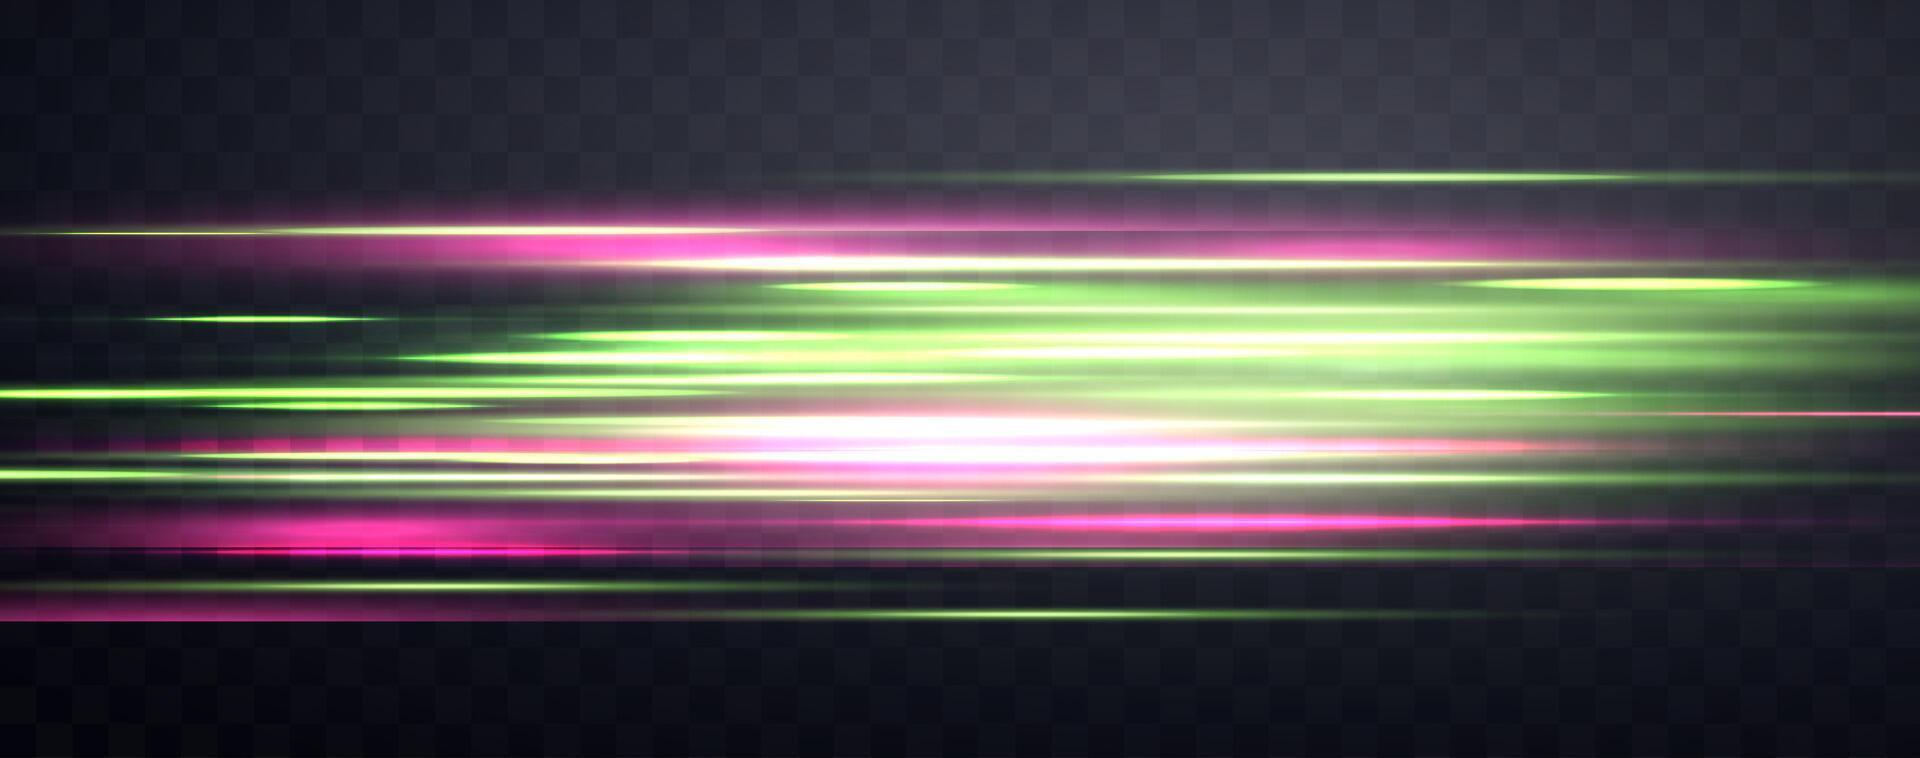 Speed rays, velocity light neon flow, zoom in motion effect, green and pink glow speed lines, colorful light trails, stripes. Abstract background, vector illustration.